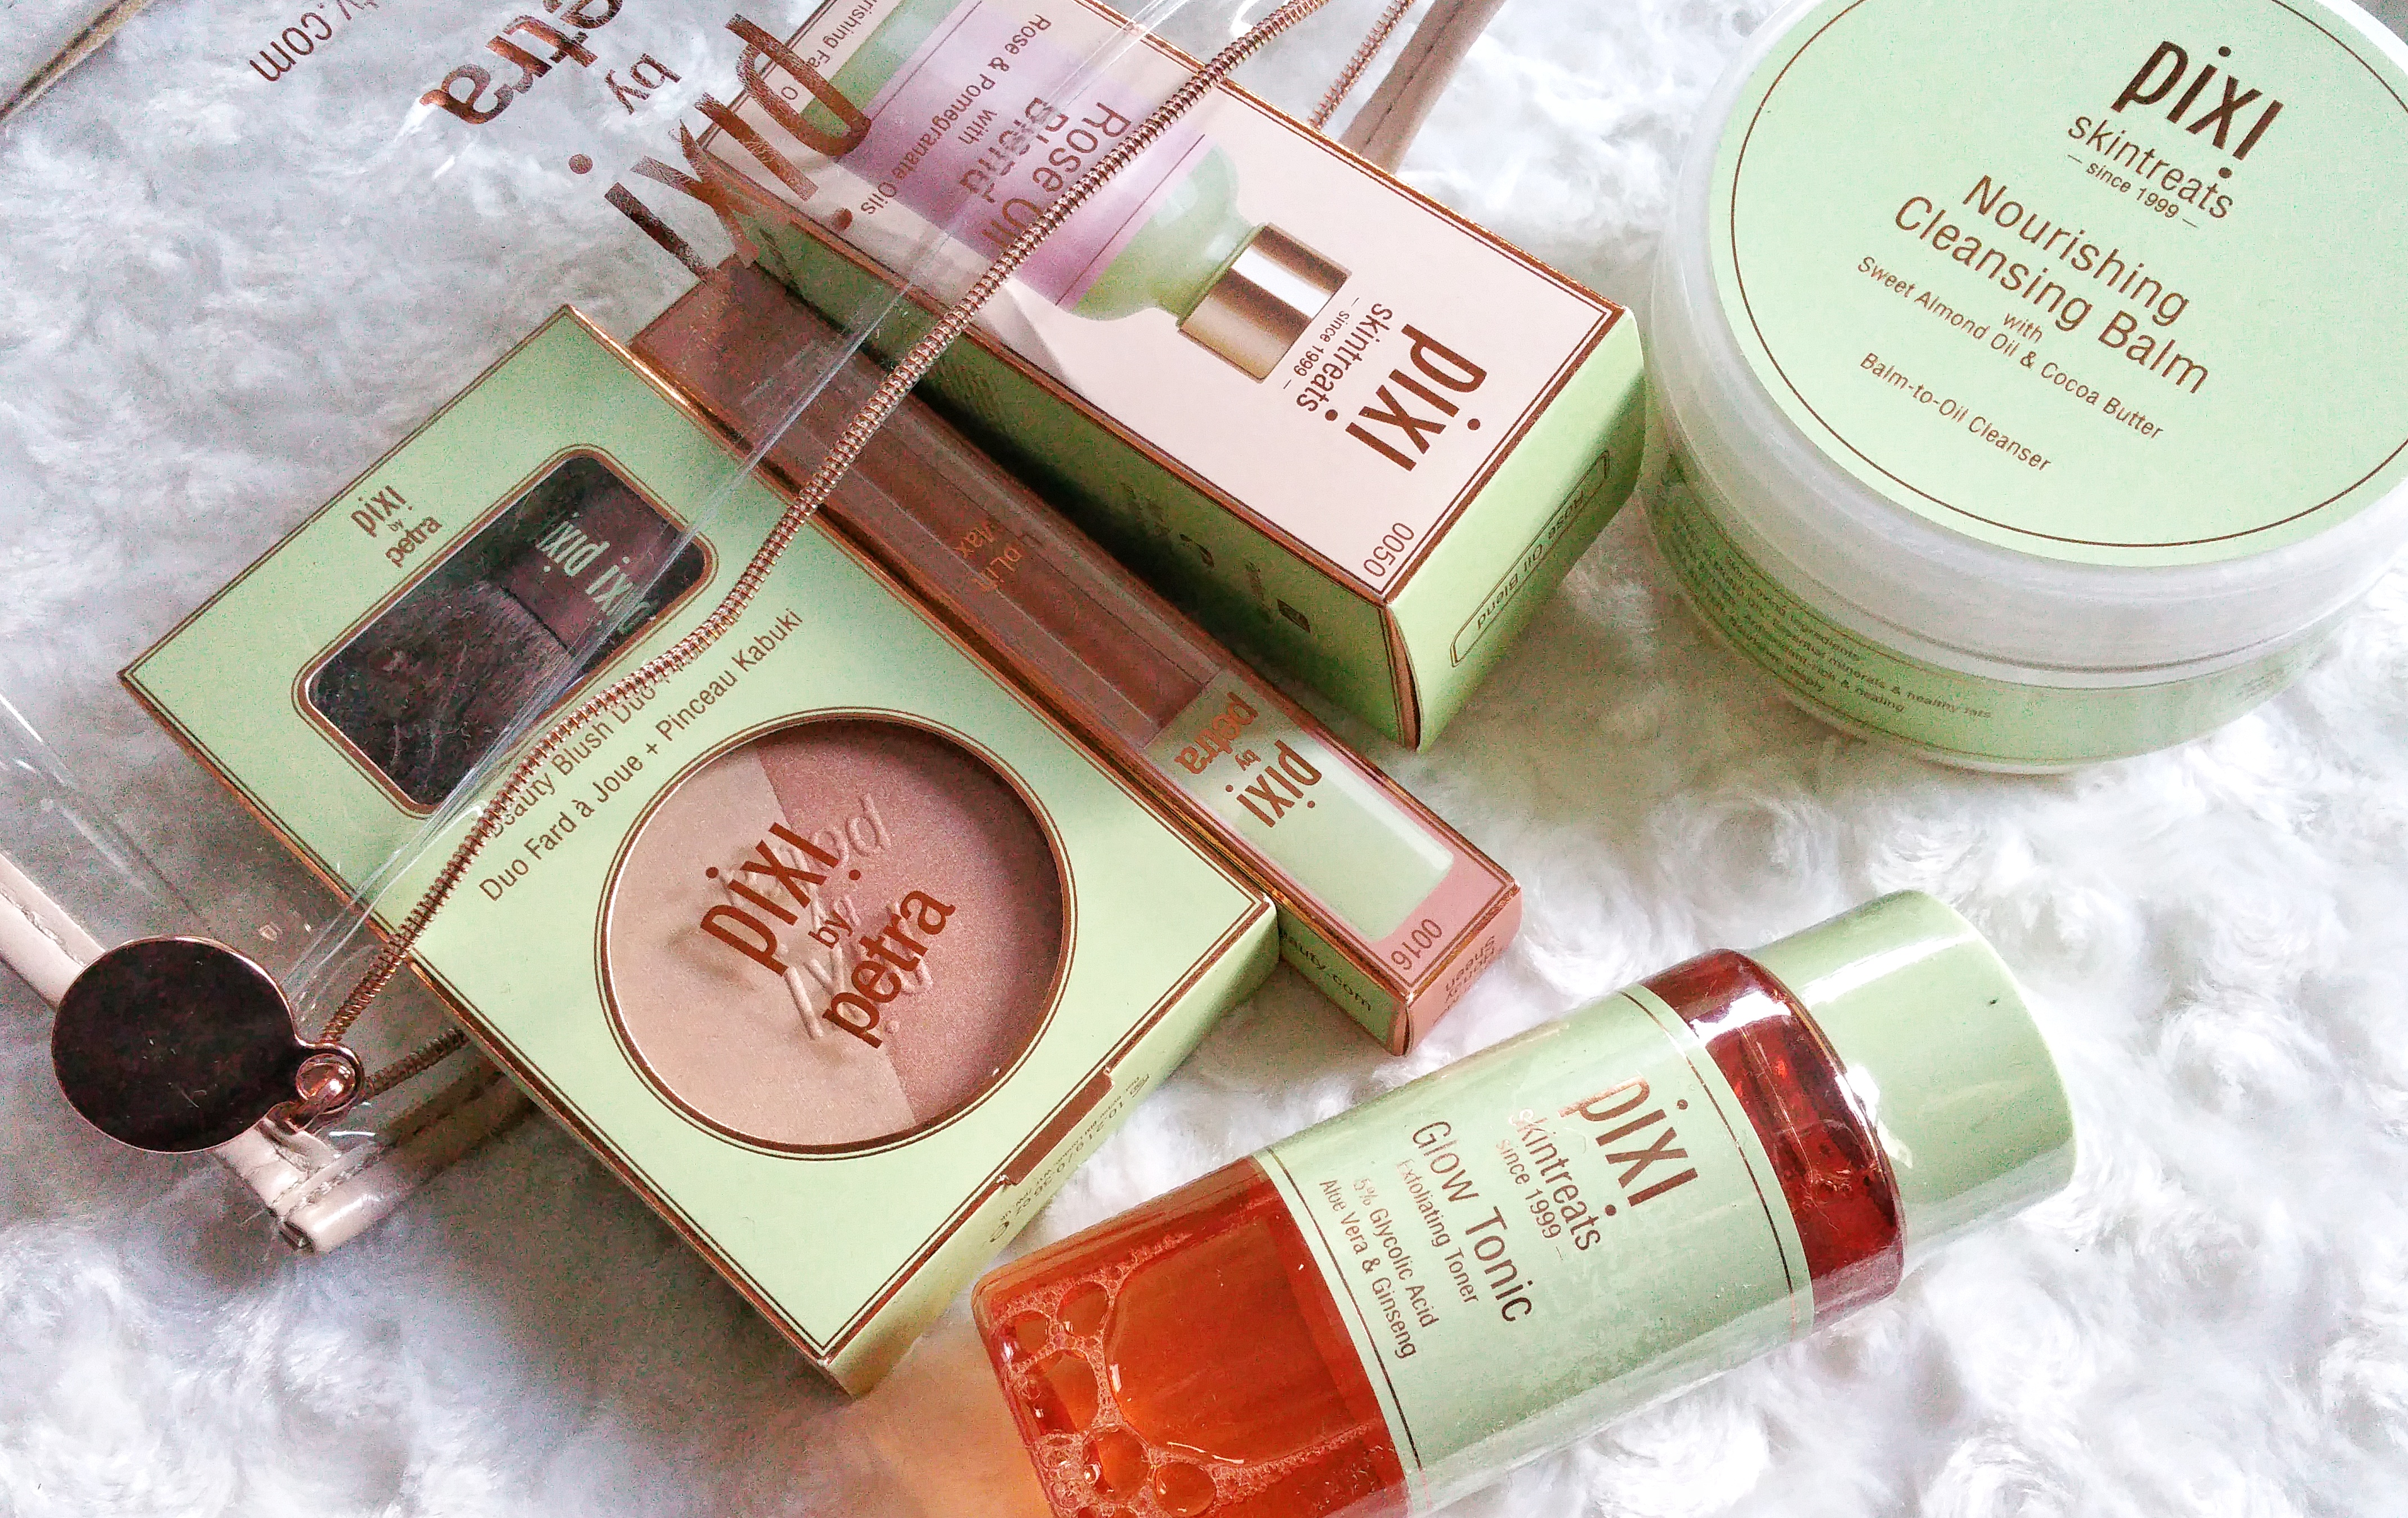 Pixi Beauty, Pixi, cosmetics, makeup, review, product review, beauty review, beauty, pixi nourishing cleansing balm, pixi glow tonic, pixi rose oil blend, pixi beauty blush duo and kabuki in peach honey, peach honey, pixi liplift max, pixi products, cosmetic products, swatches,